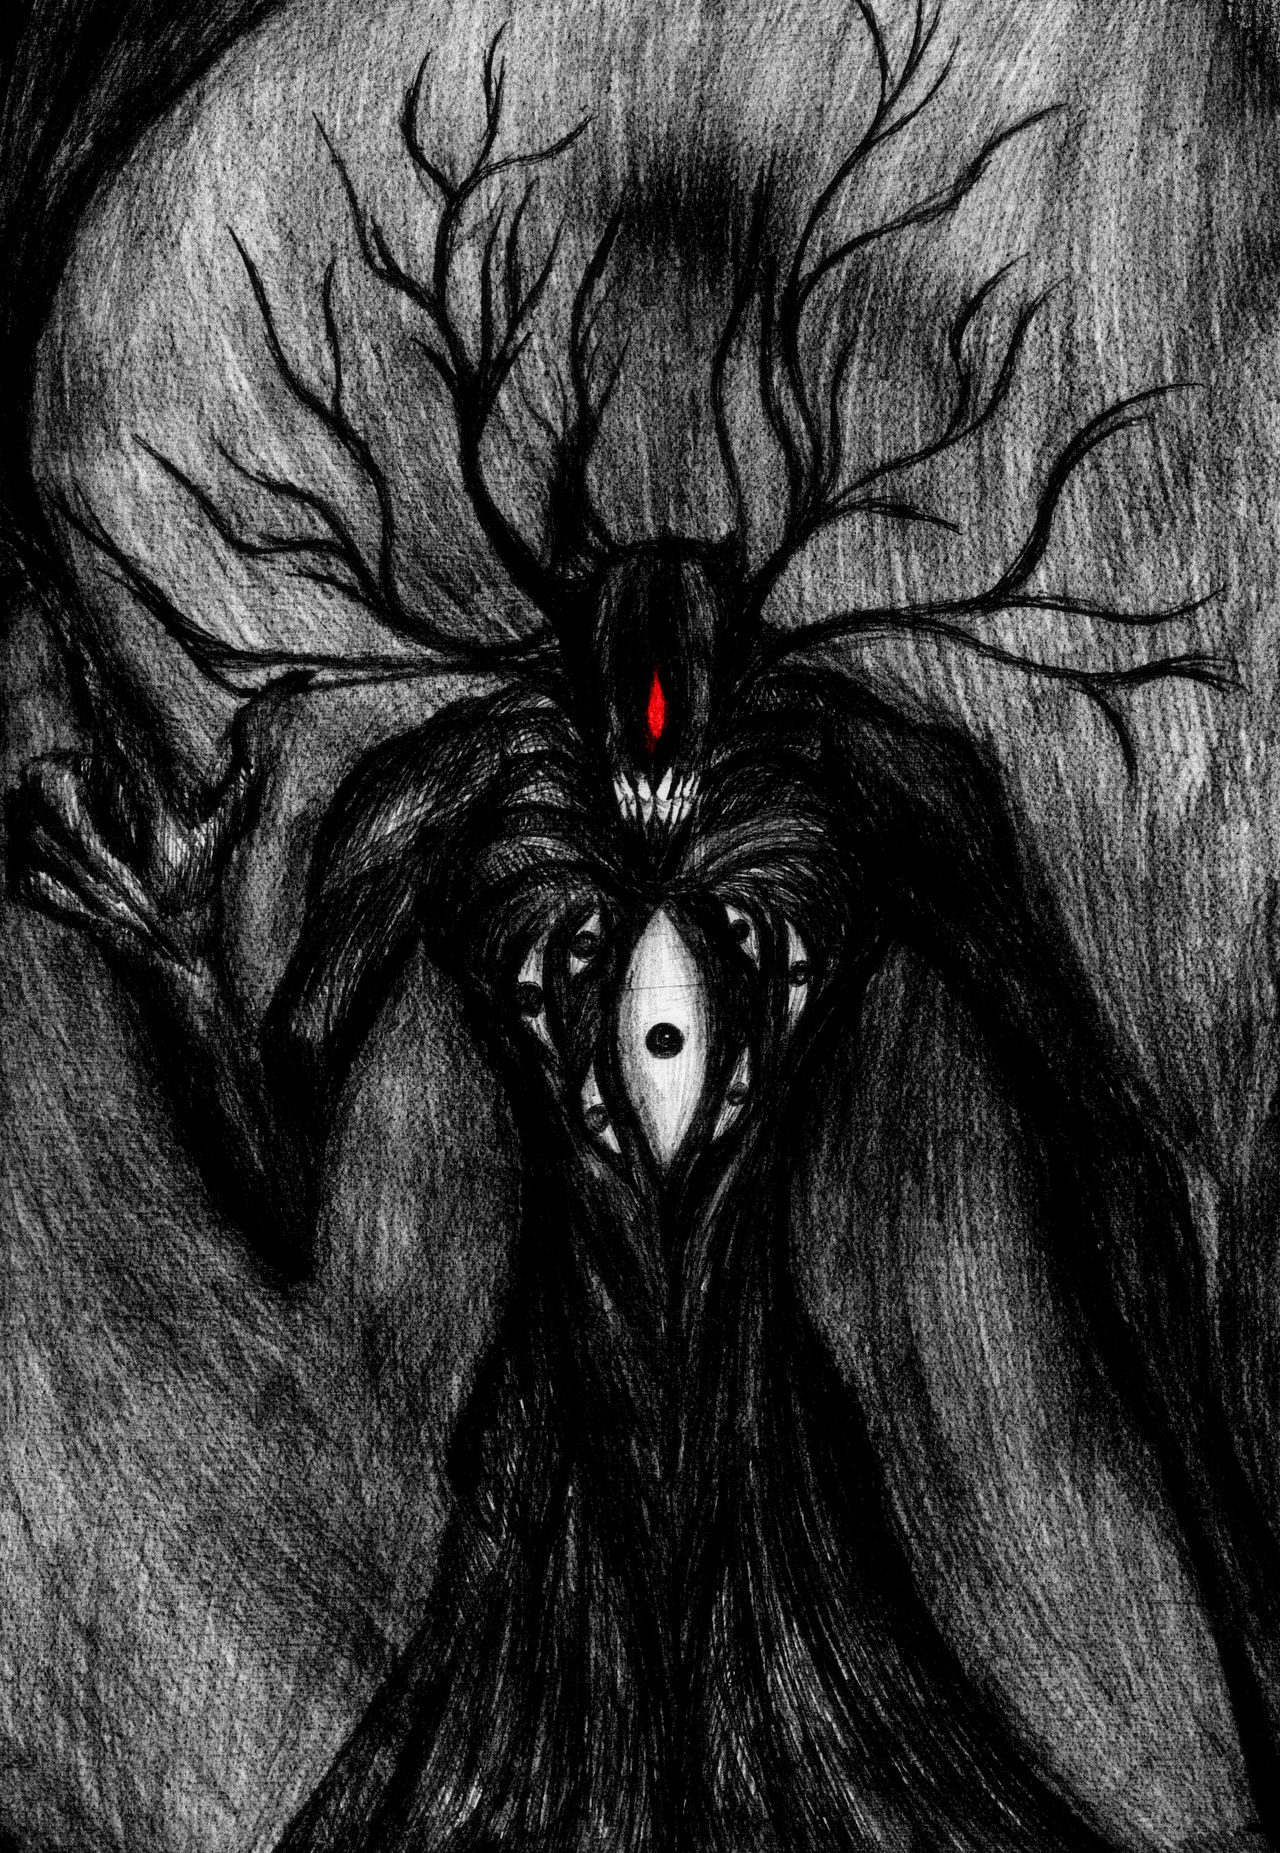 SCP-096 by Avargus on DeviantArt